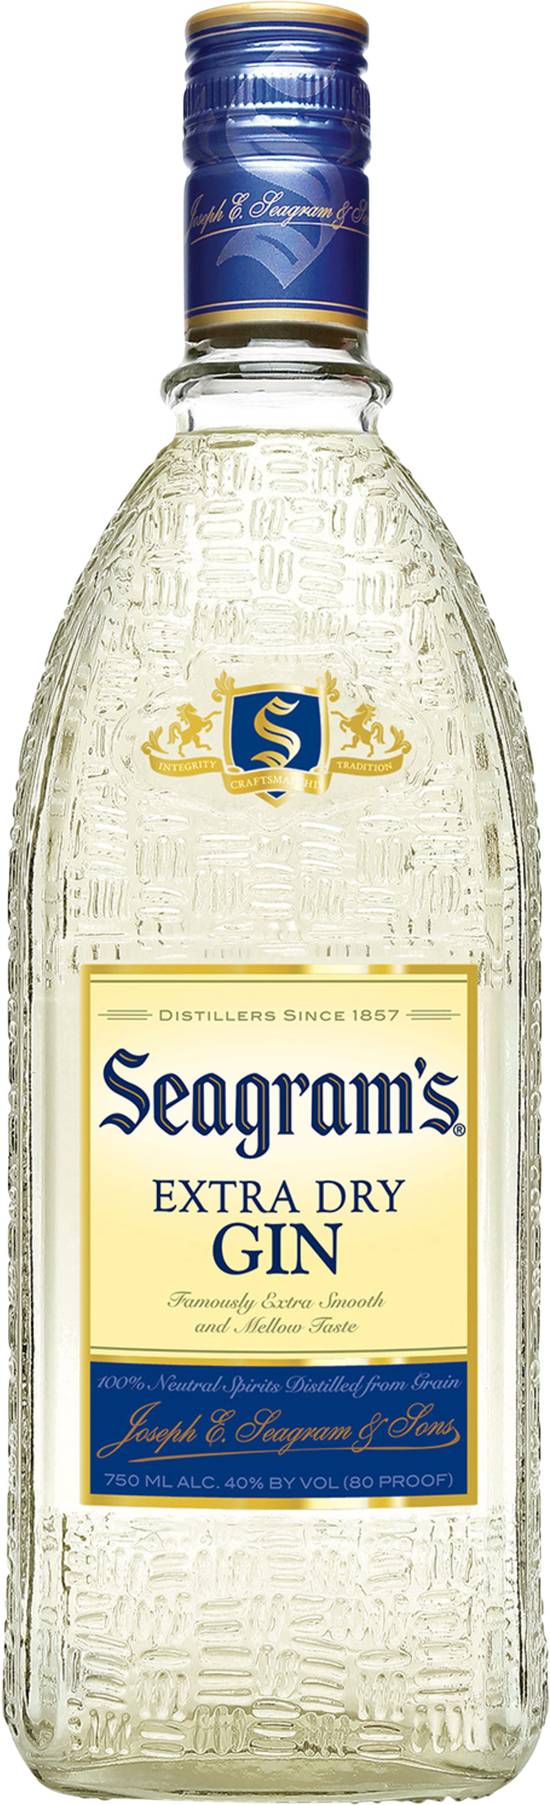 Seagram's Escapes Extra Dry Gin (750 ml)